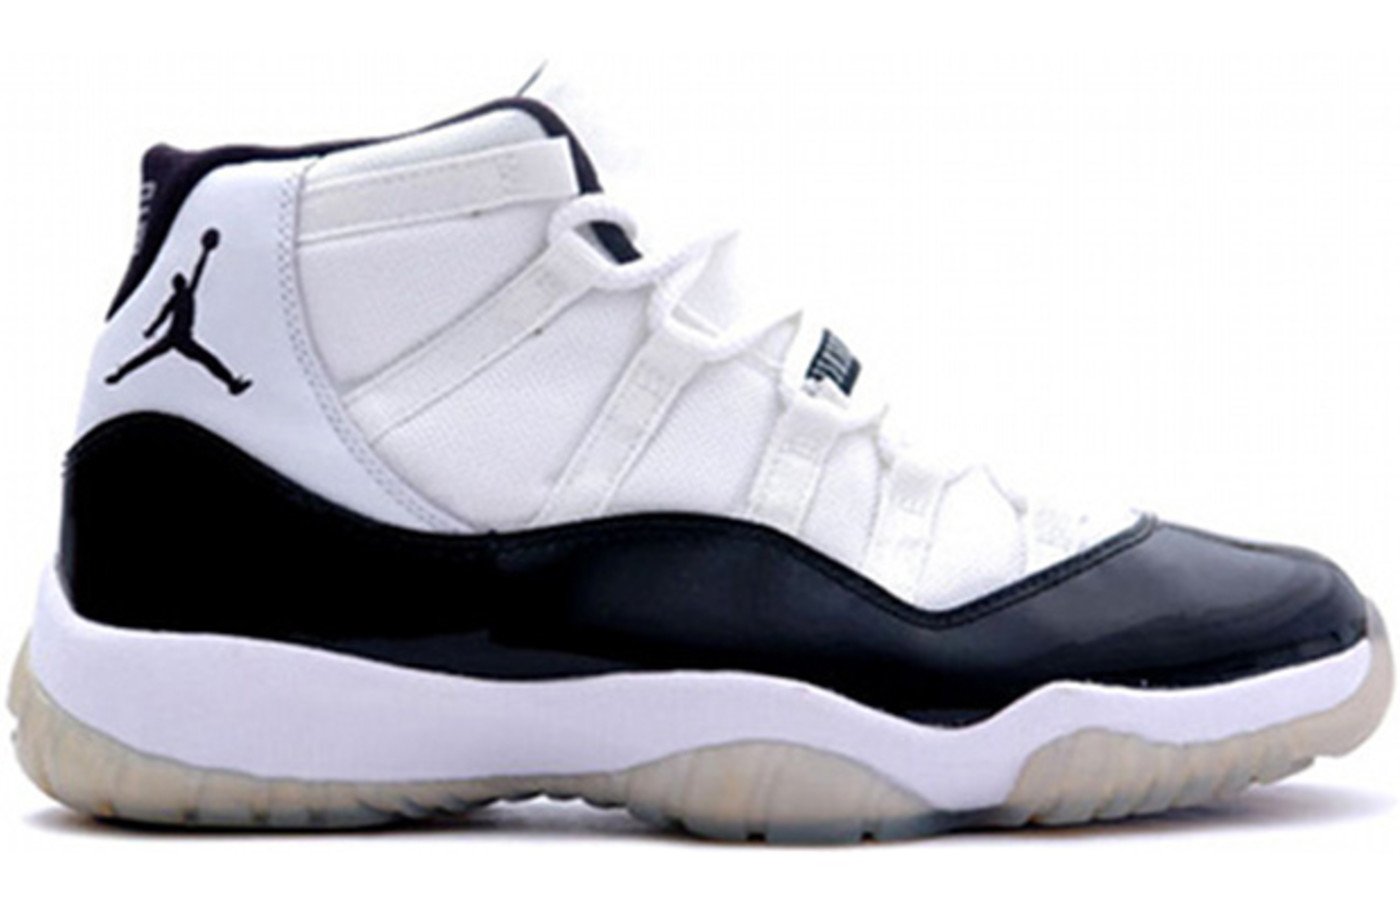 most classic shoes of all time